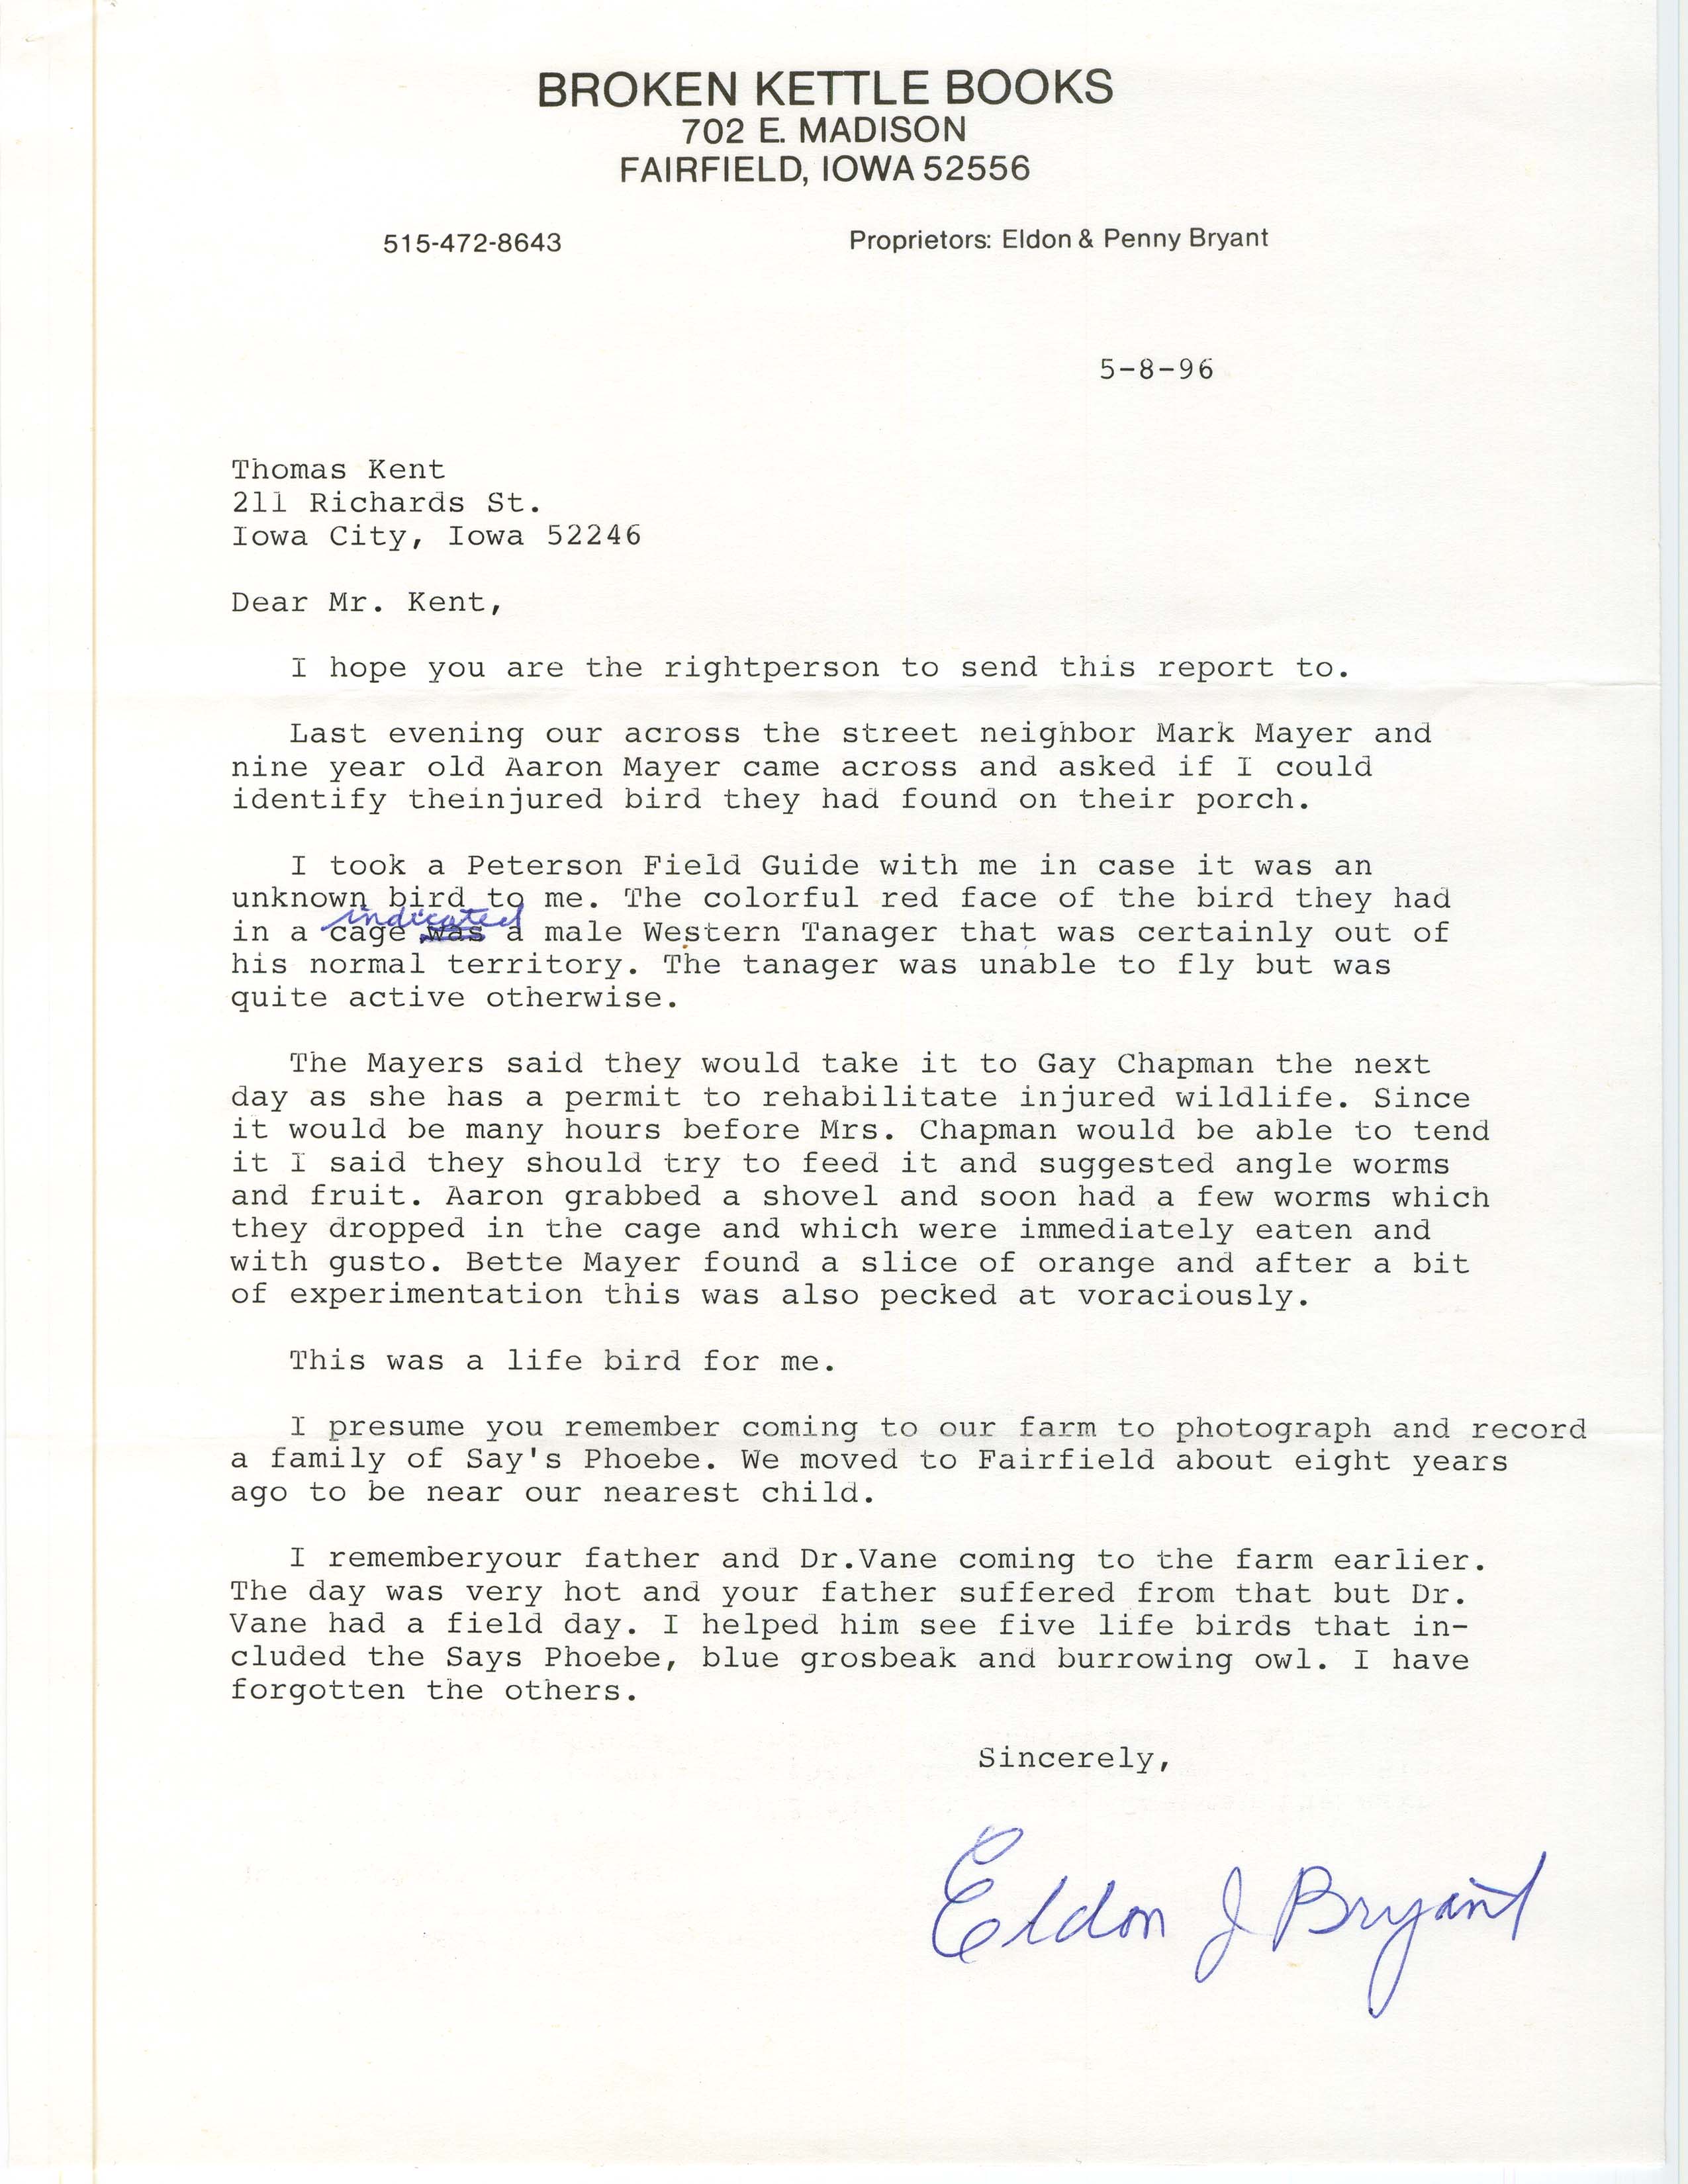 Eldon J. Bryant letters to Thomas H. Kent regarding a possible Western Tanager that had been injured, May 8, 1996